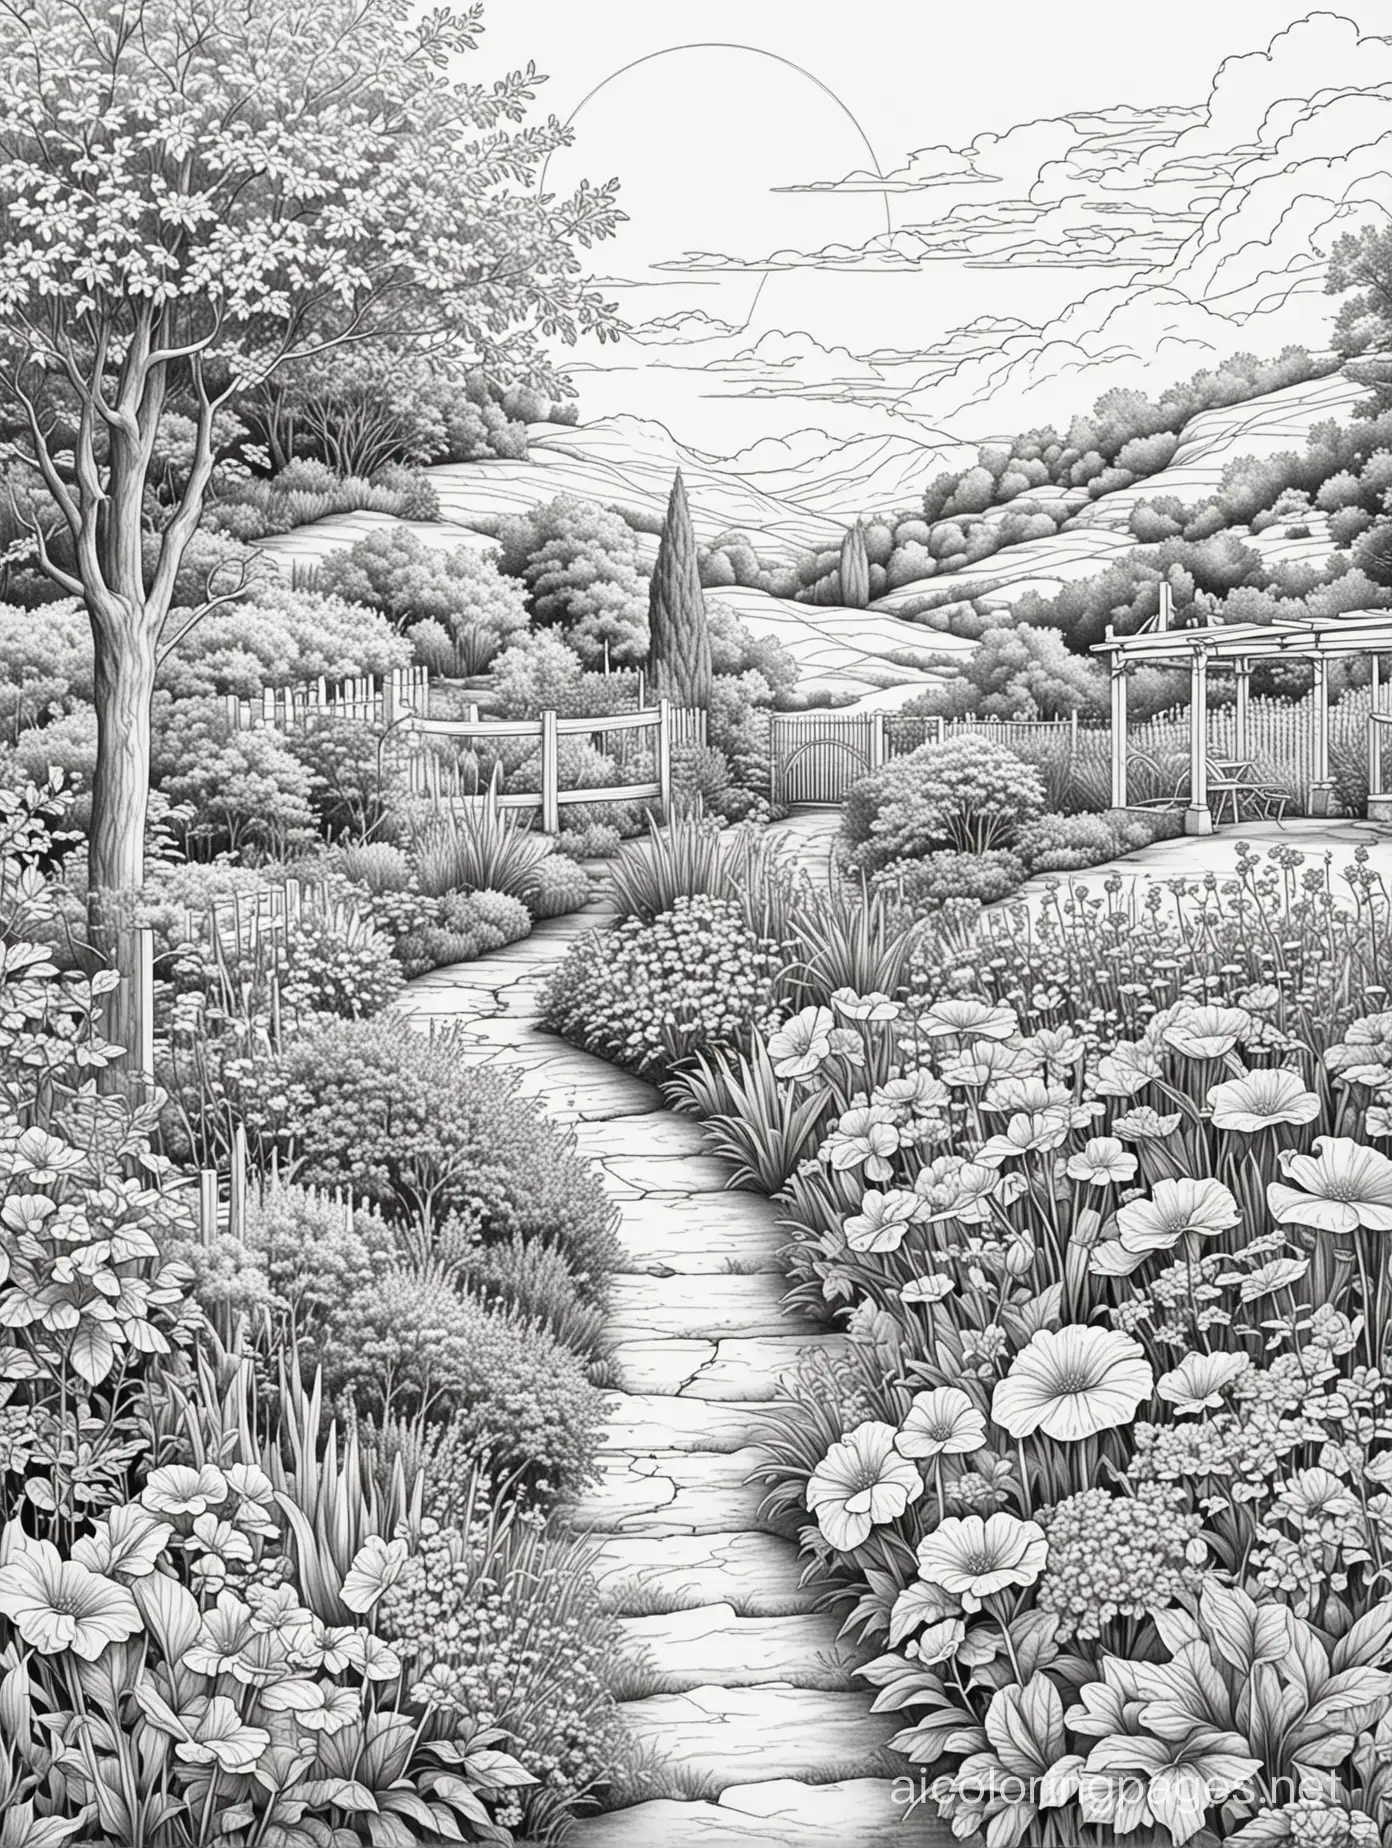 Create a picture for adult colouring in black and white only.  The theme of the picture: British garden. gardening. Style: sketching, ink, line drawings. 
 Detail of the picture is medium. on the background are light hills Ratio 11:8.5 
, Coloring Page, black and white, line art, white background, Simplicity, Ample White Space. The background of the coloring page is plain white to make it easy for young children to color within the lines. The outlines of all the subjects are easy to distinguish, making it simple for kids to color without too much difficulty